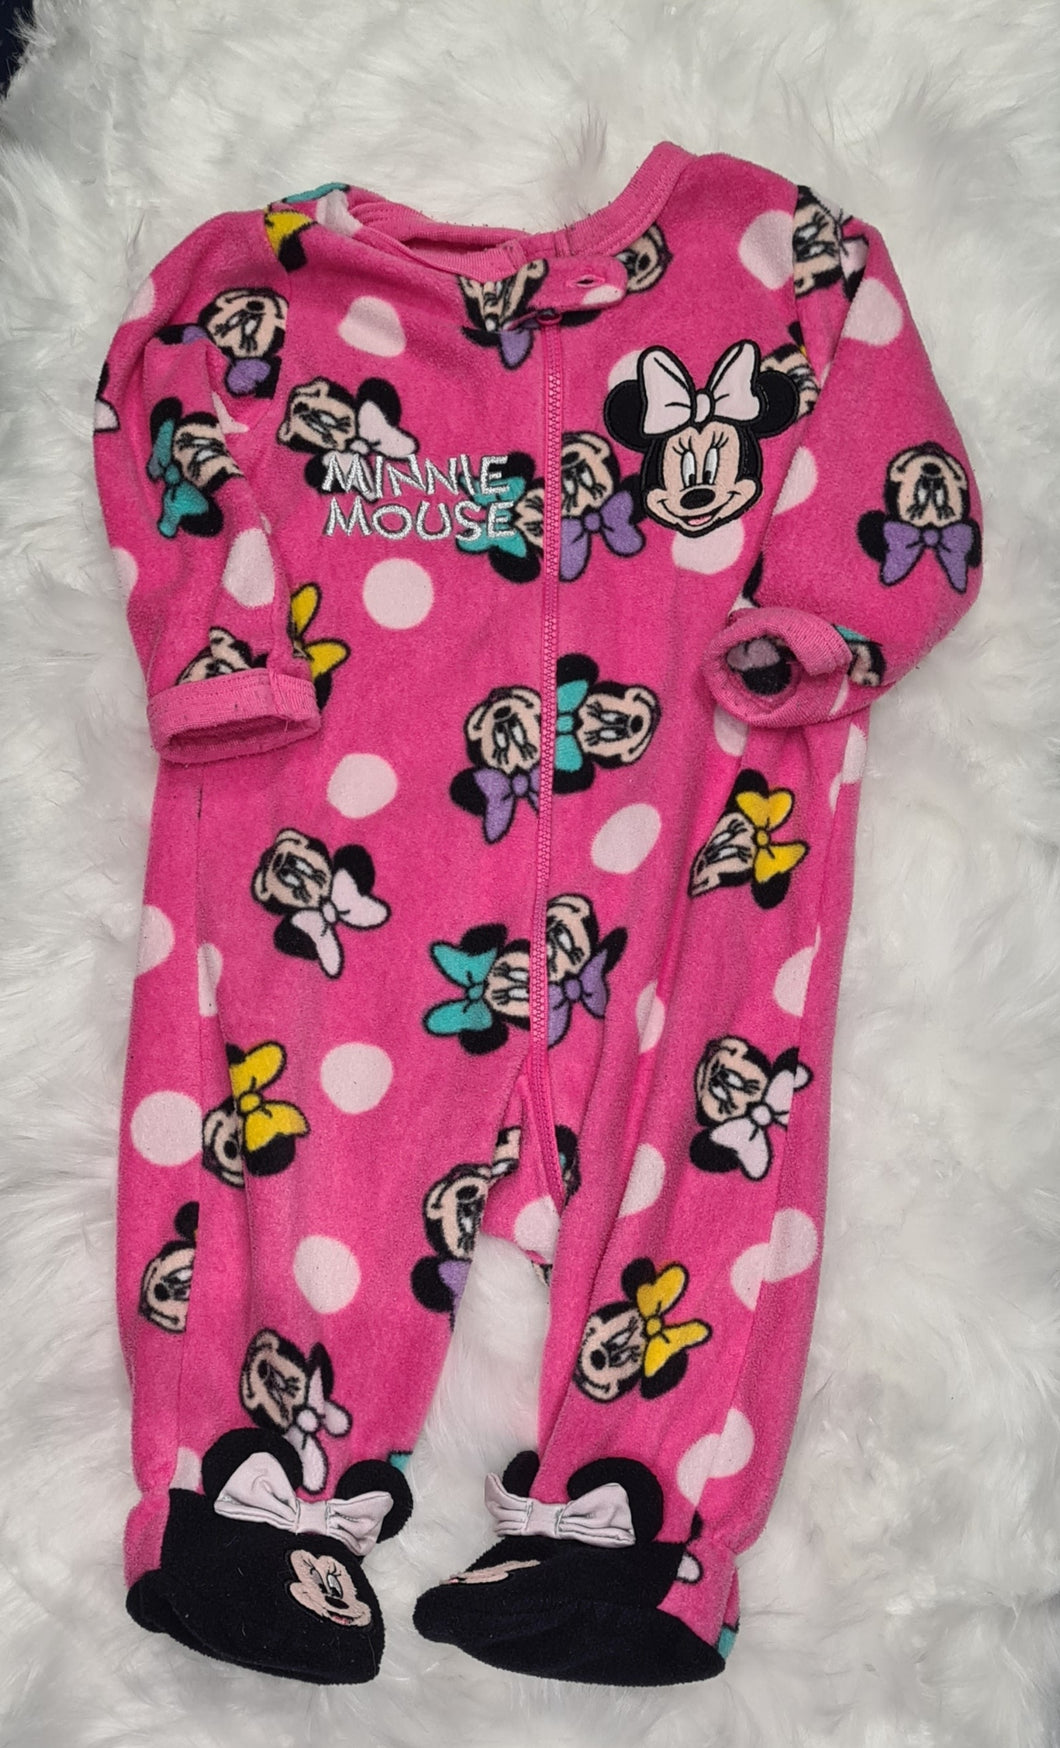 Girls 6-9 months - Disney/Minnie Mouse Pink Fluffy Baby Grown